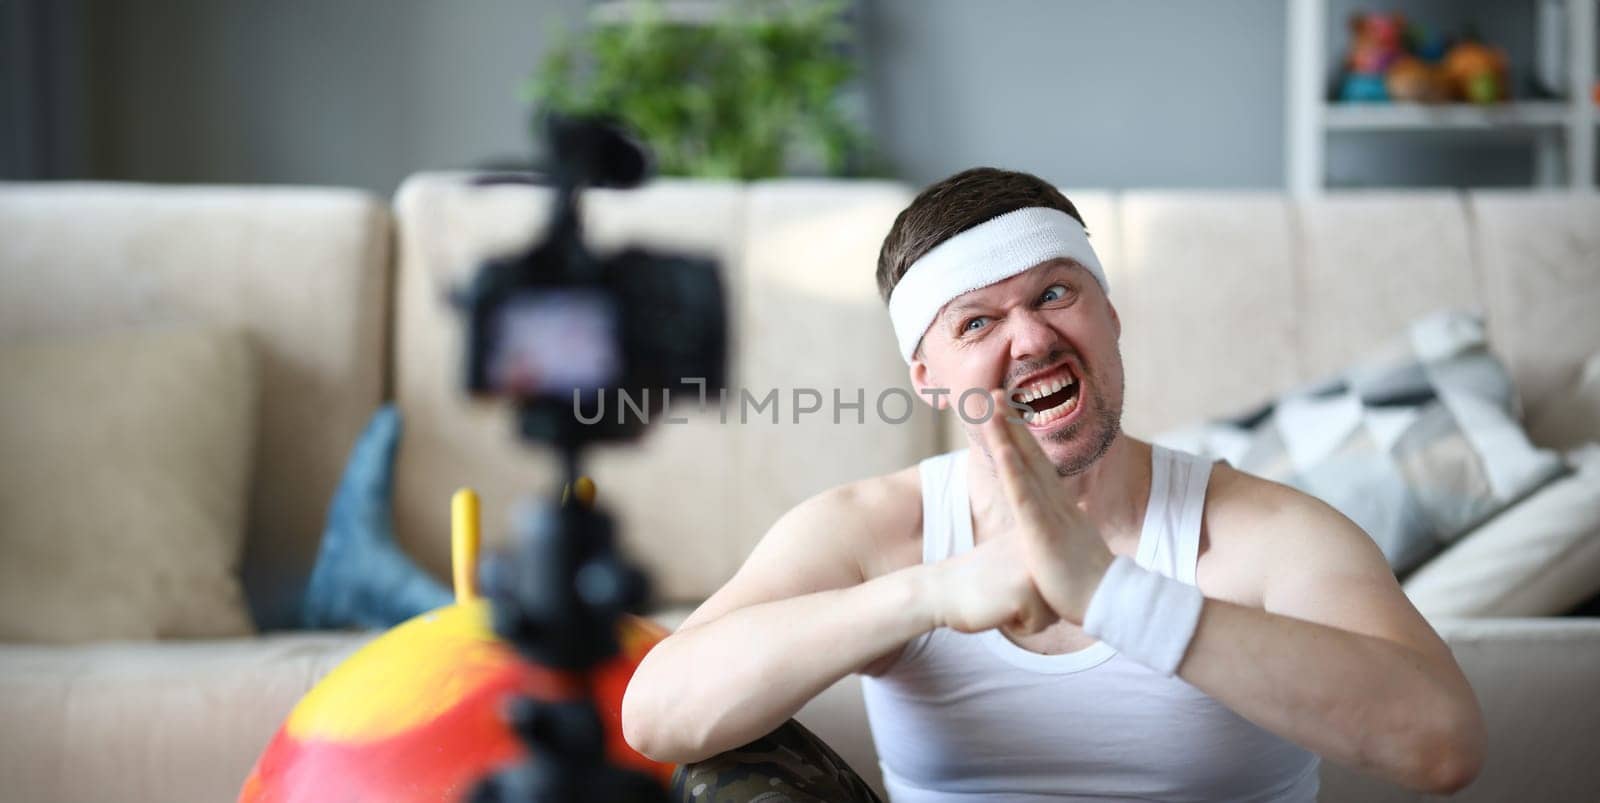 Blogger with Funny Face Record Fitness Exercise. Man Sportsman Shooting Workout on Digital Camera for Aerobic Blog. Bearded Male Training in Apartment. Guy Practice Healthy Lifestyle Photography